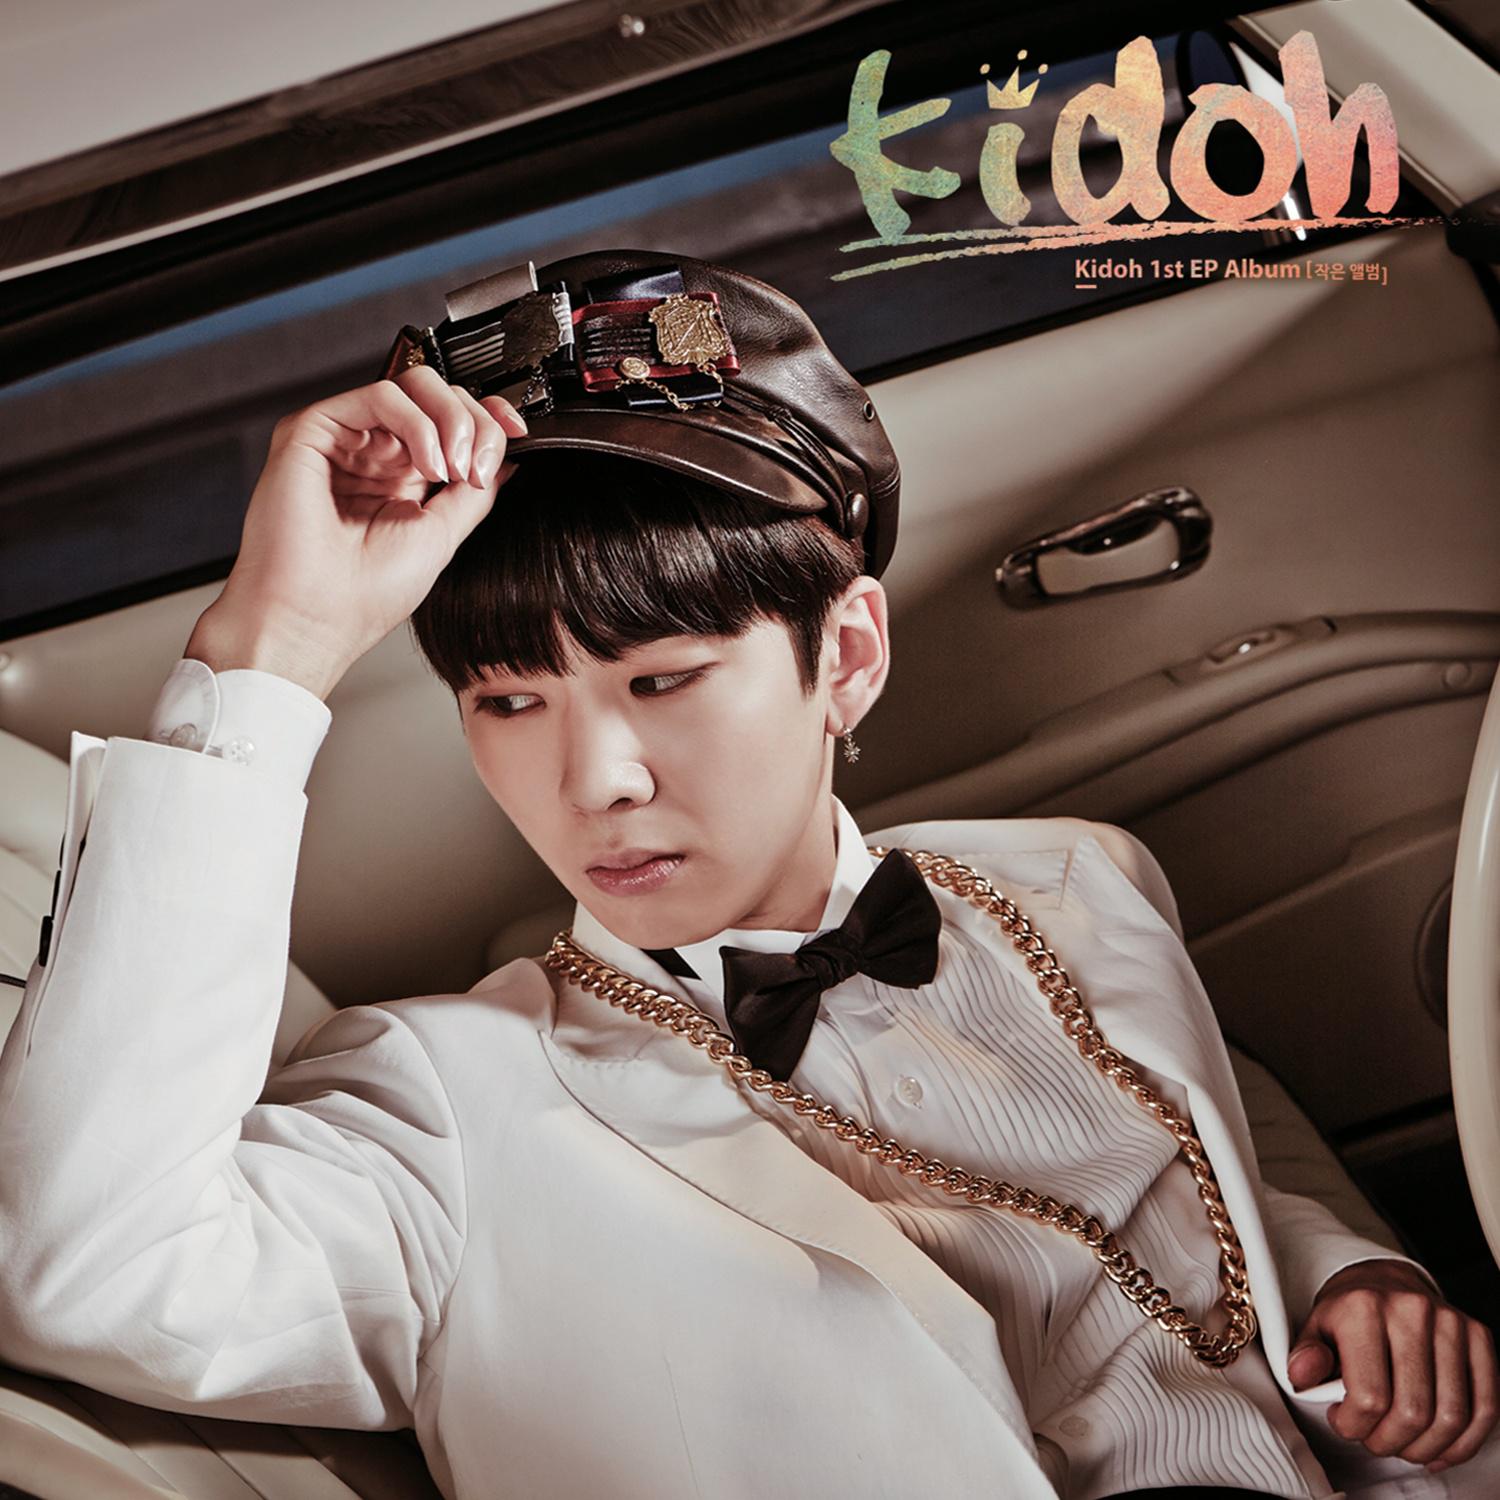 Kidoh - Taxi On The Phone